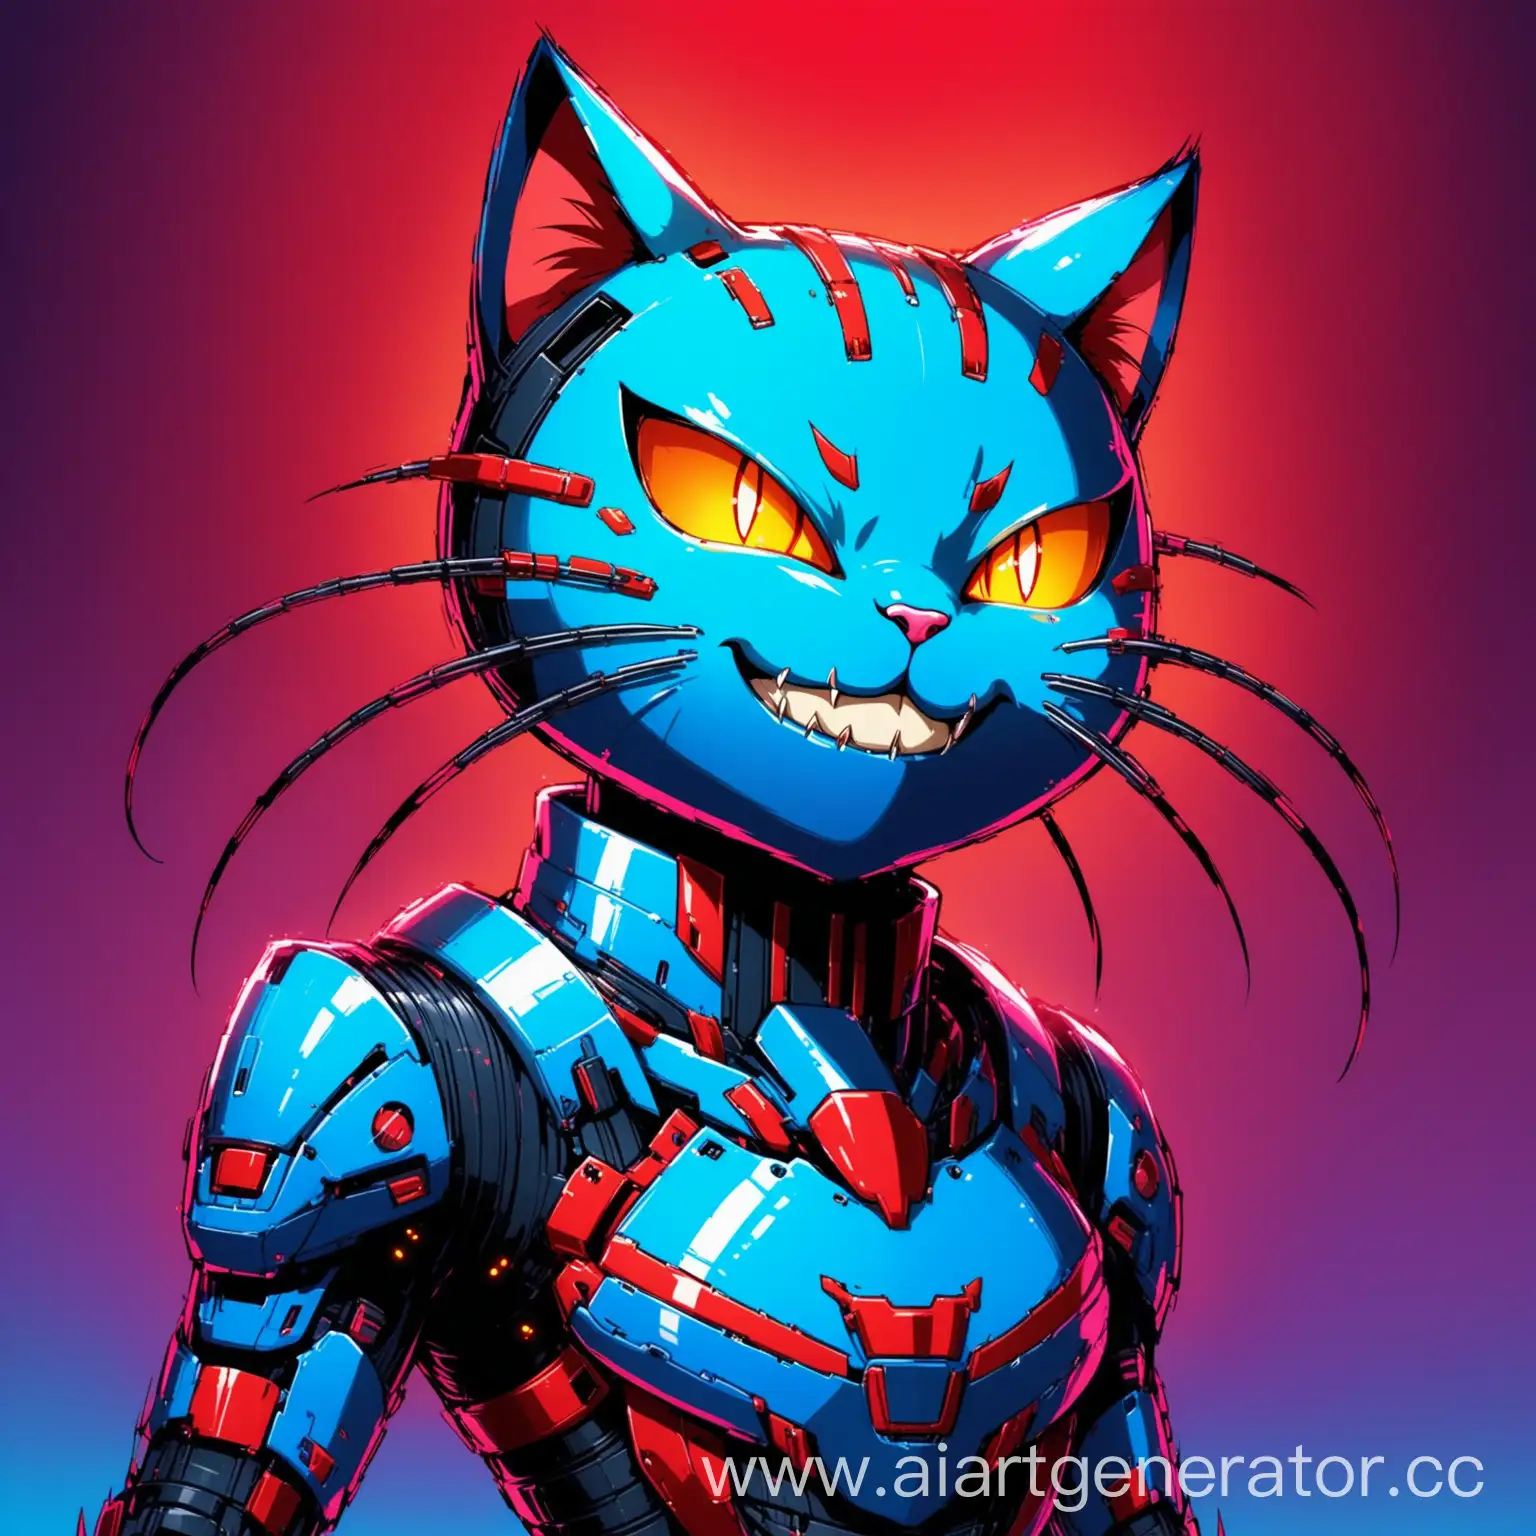 Mischievous-Cyber-Cat-in-Blue-and-Red